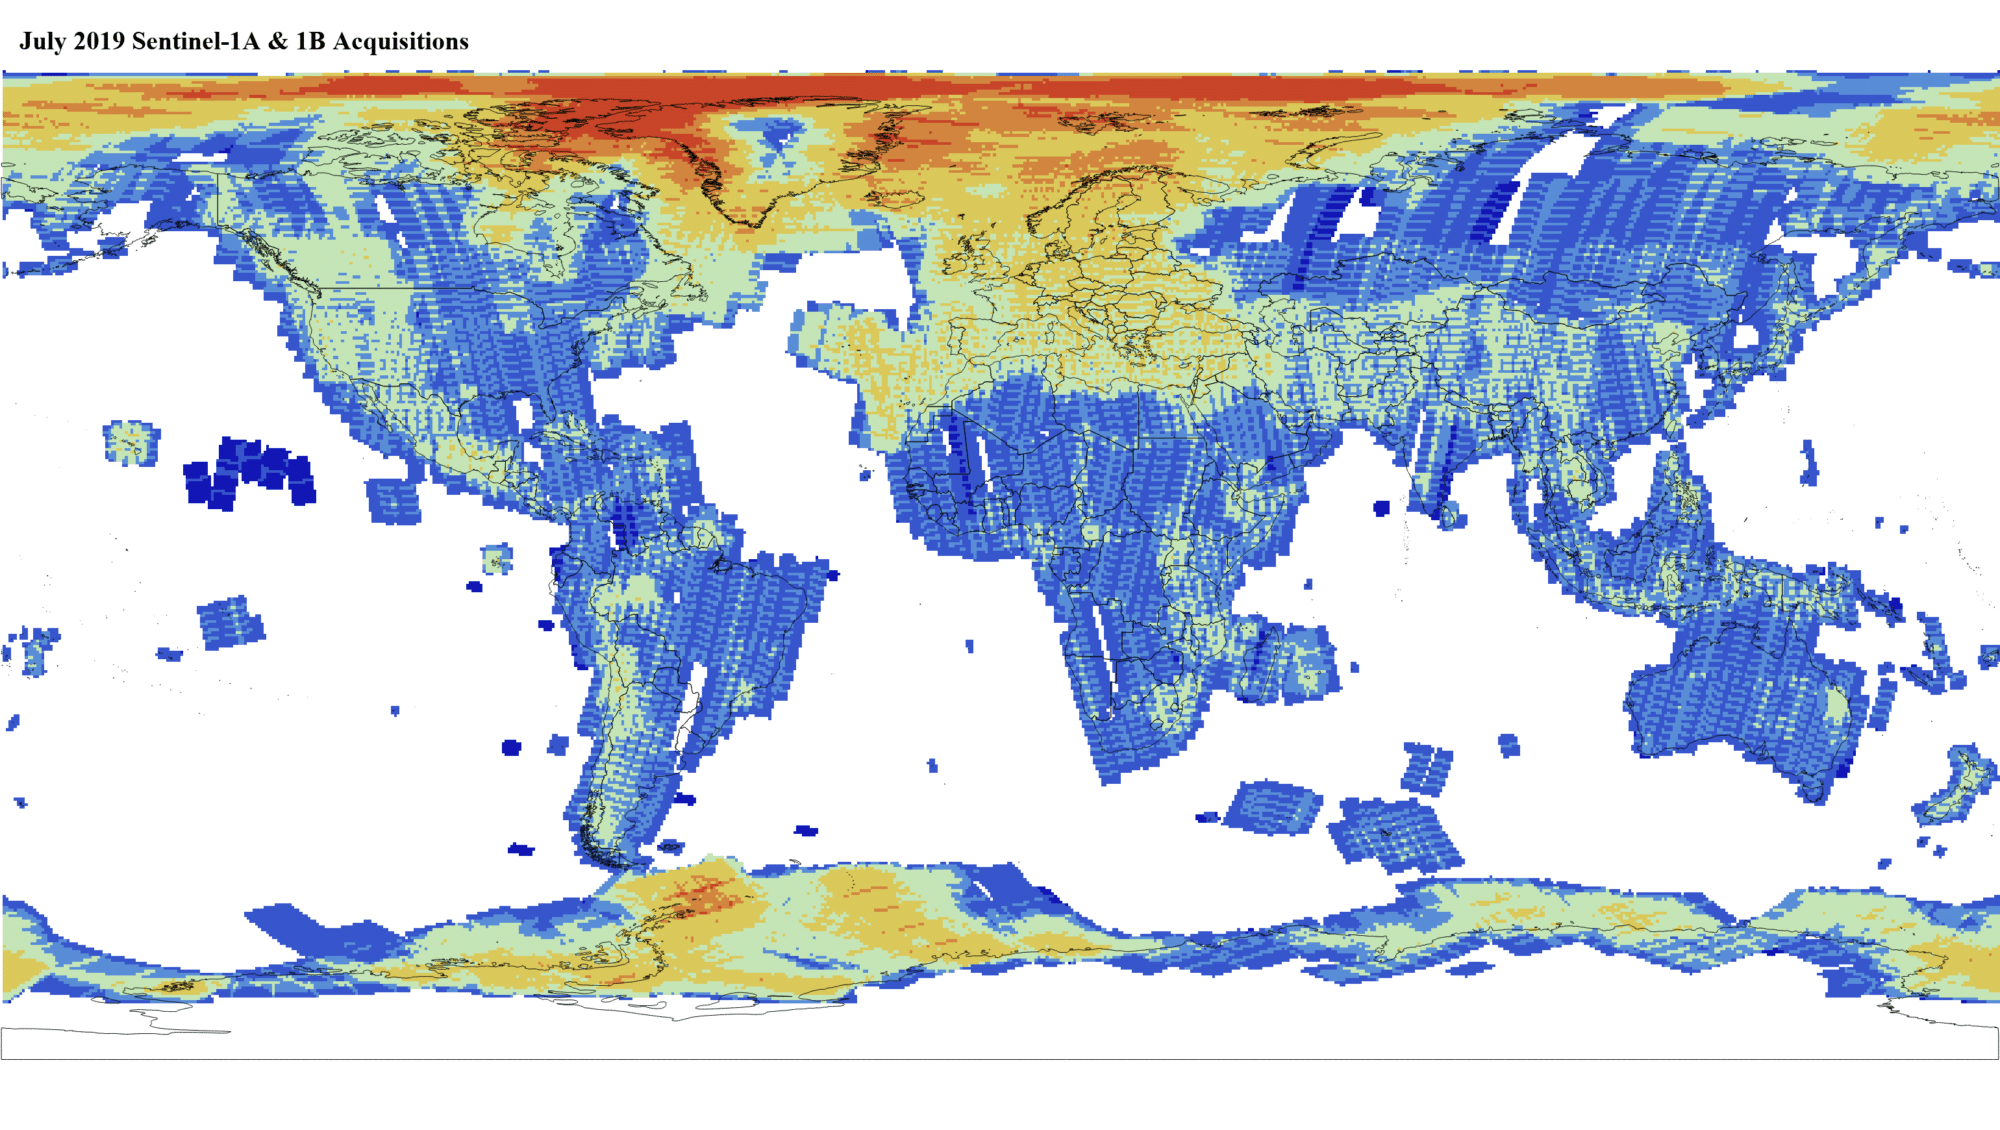 Heat map of Sentinel-1A and -1B GRD global acquisitions July 2019